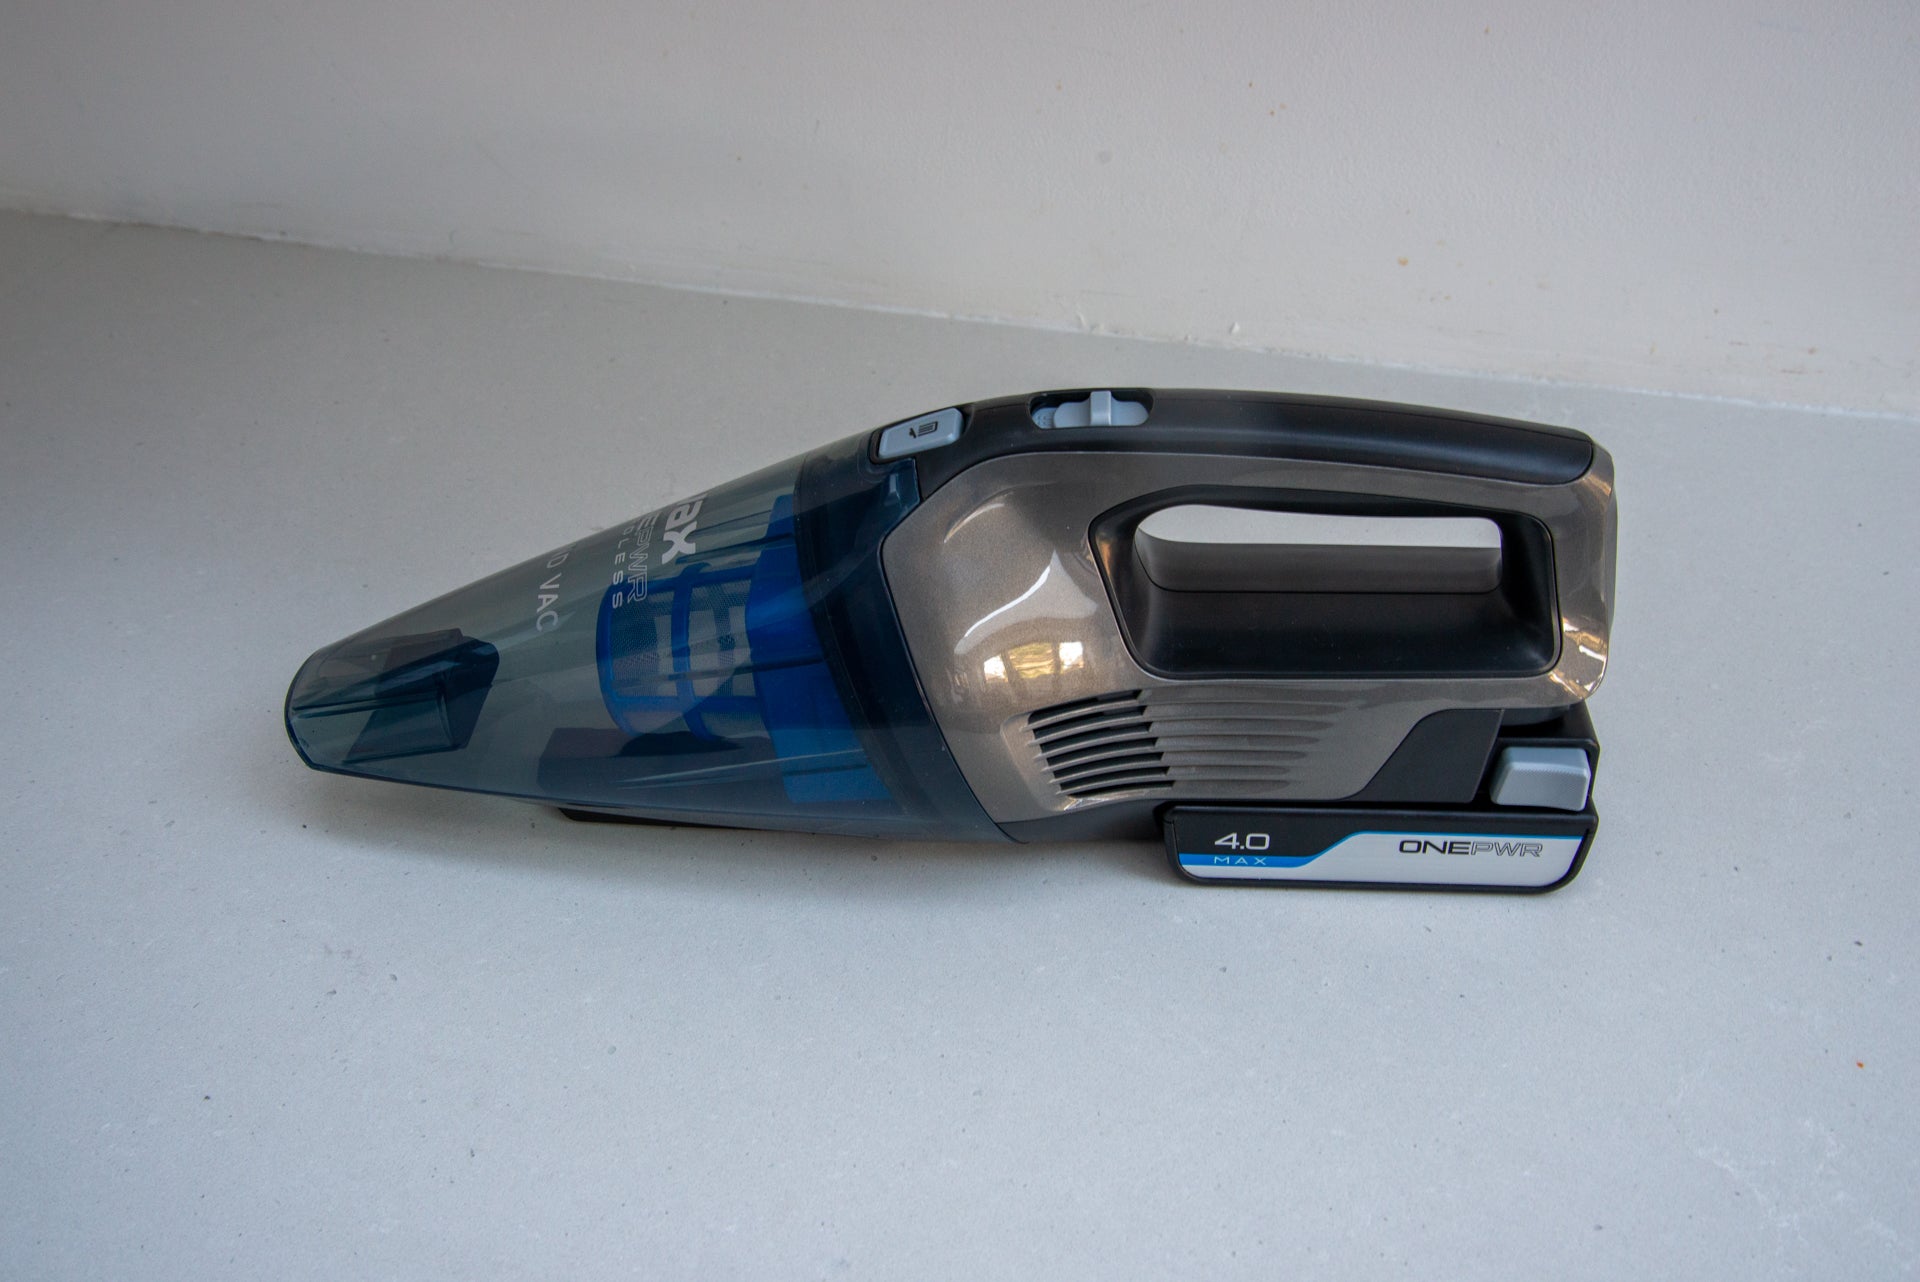 The best budget handheld vacuum cleaner is the Vax ONEPWR Cordless Hand Vac